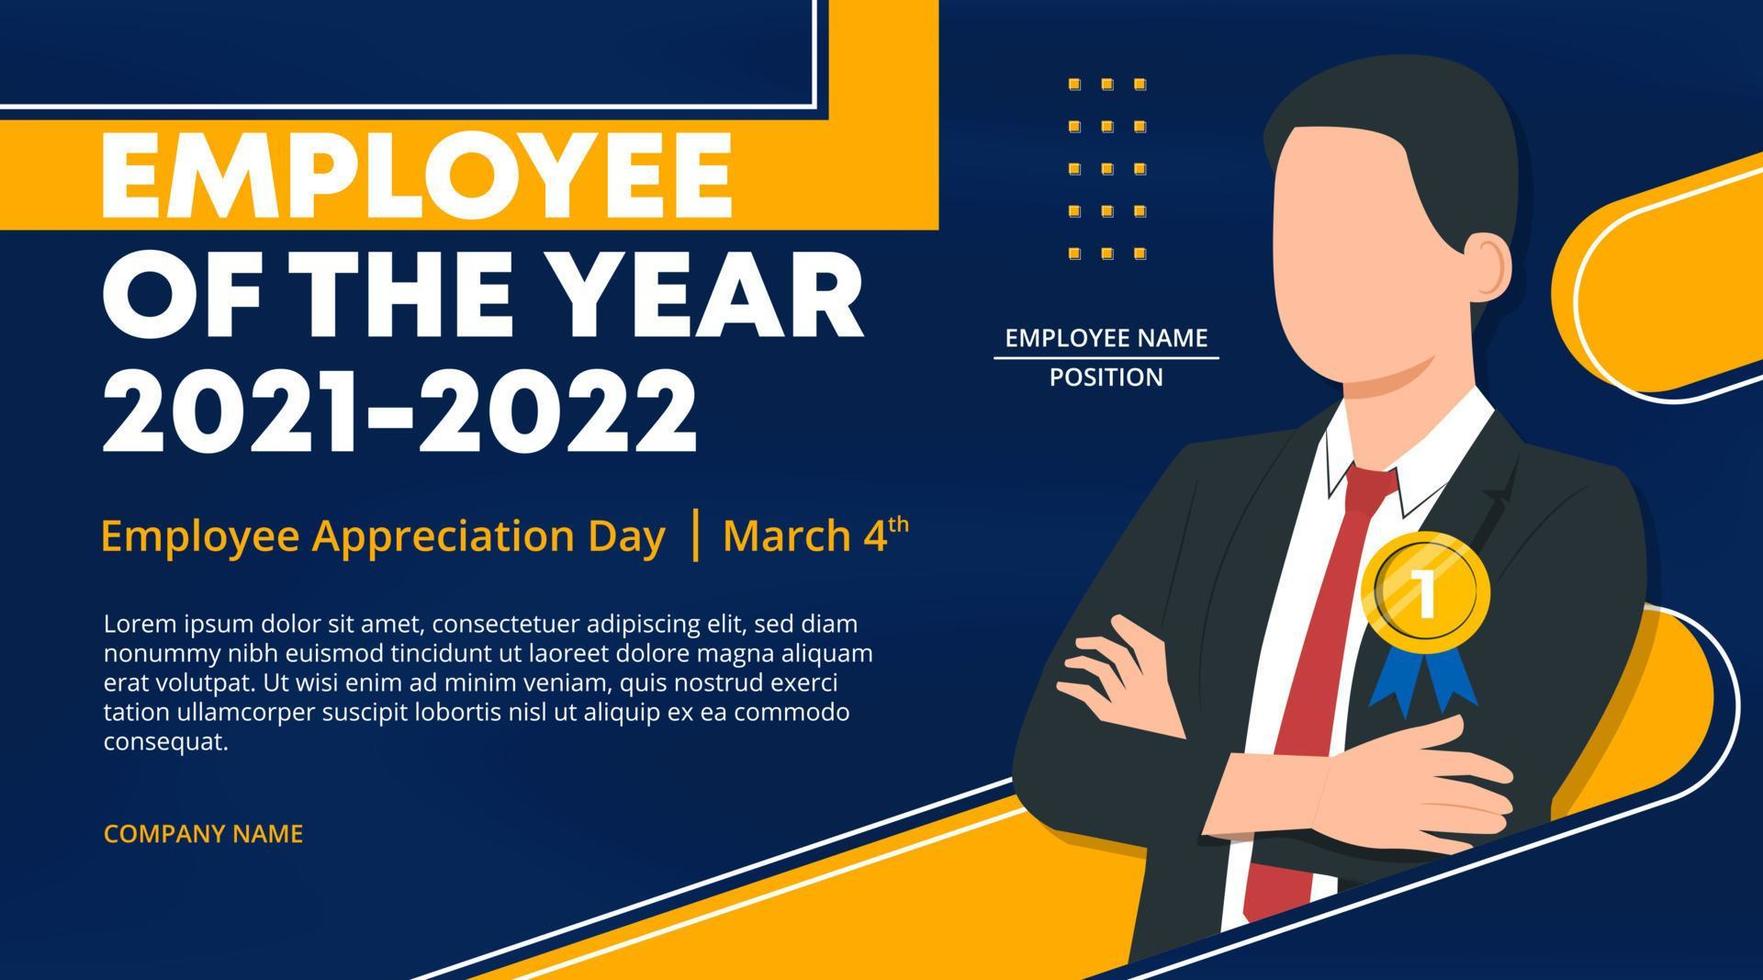 Employee appreciation day banner with an employee of the year winner vector